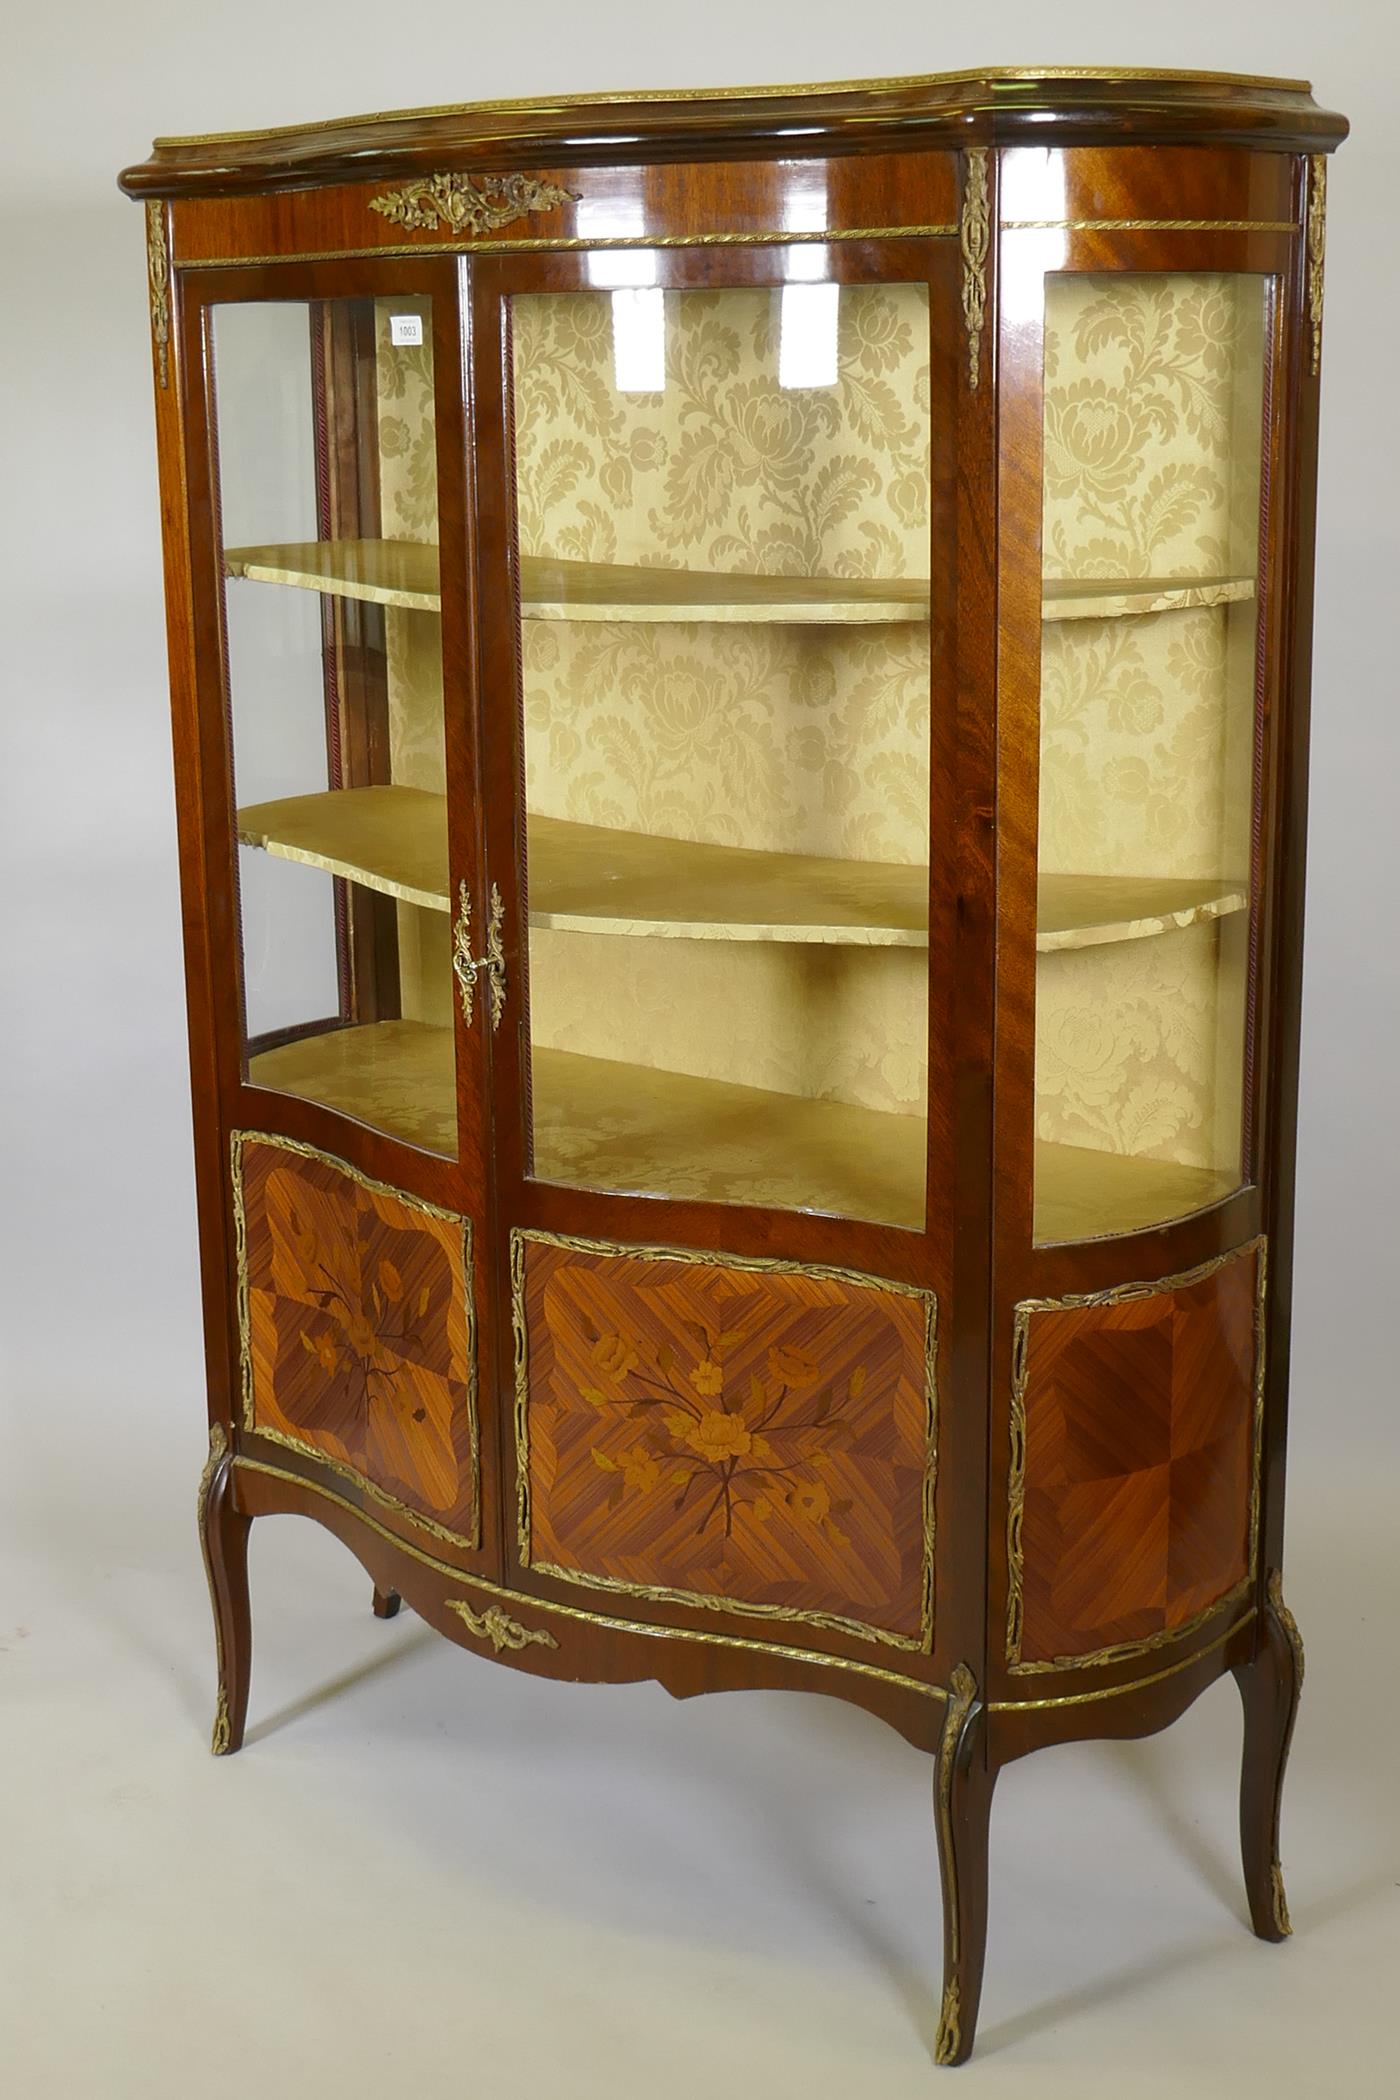 A French marquetry inlaid mahogany serpentine front vitrine with brass mounts, the interior with - Image 3 of 6